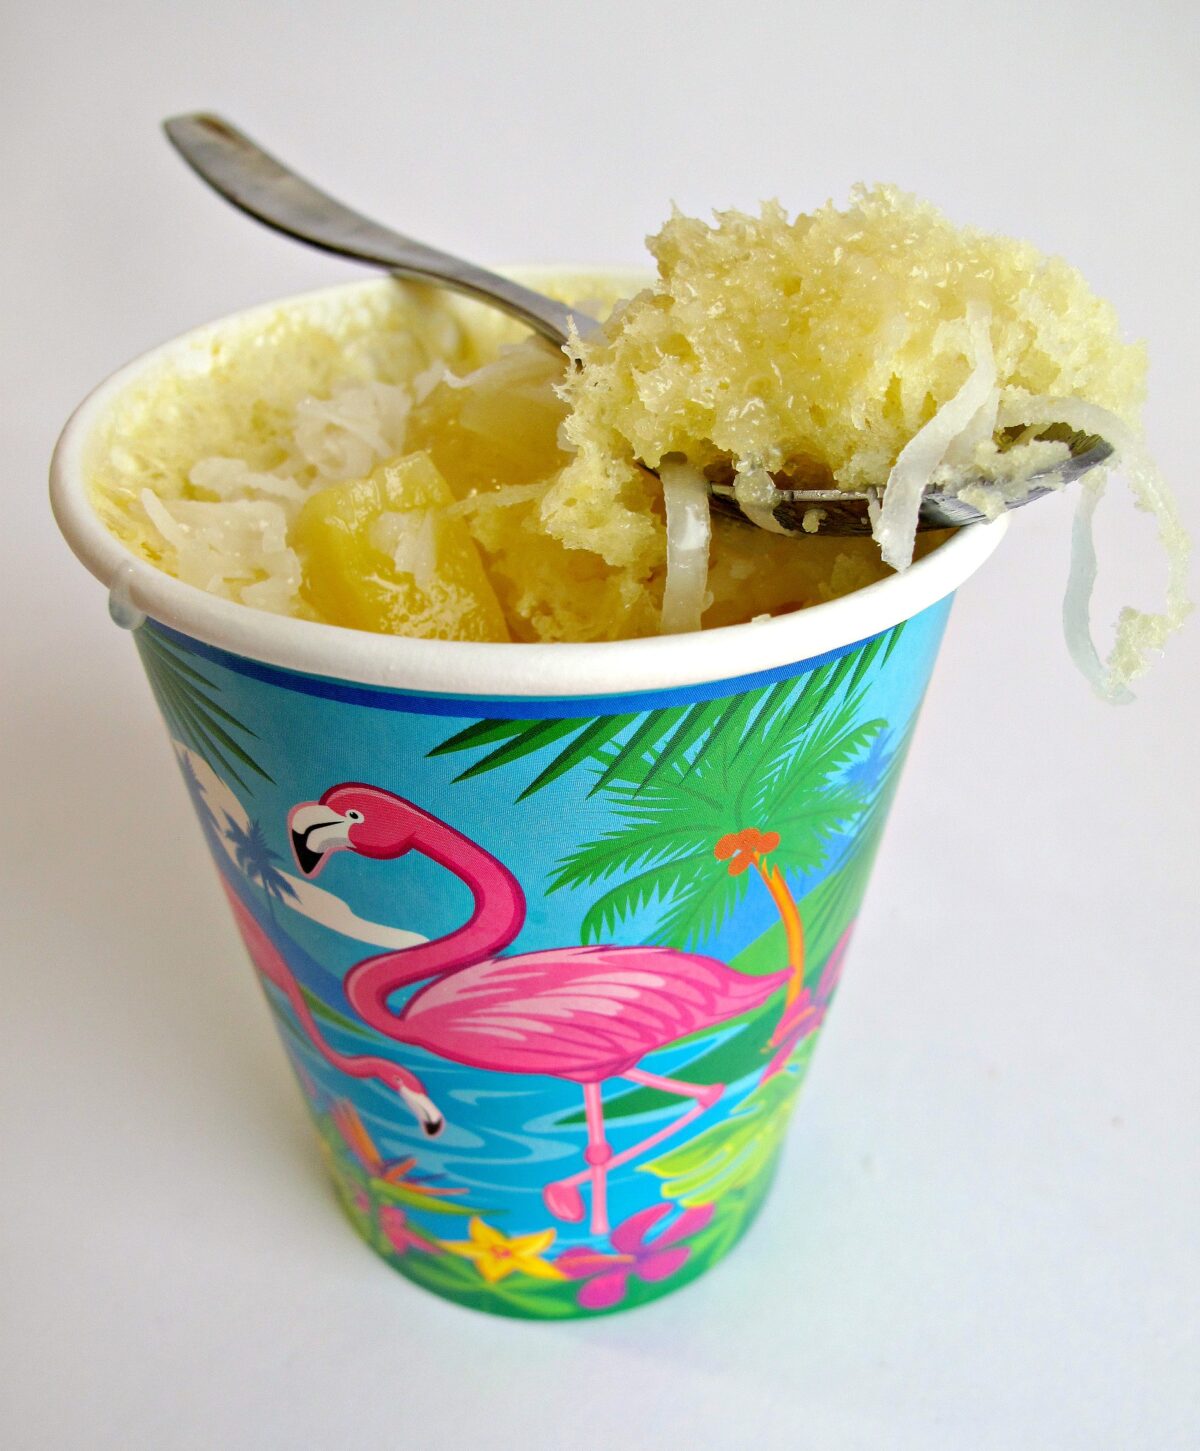 Piña Colada Cake in a paper cup with a spoon on top.